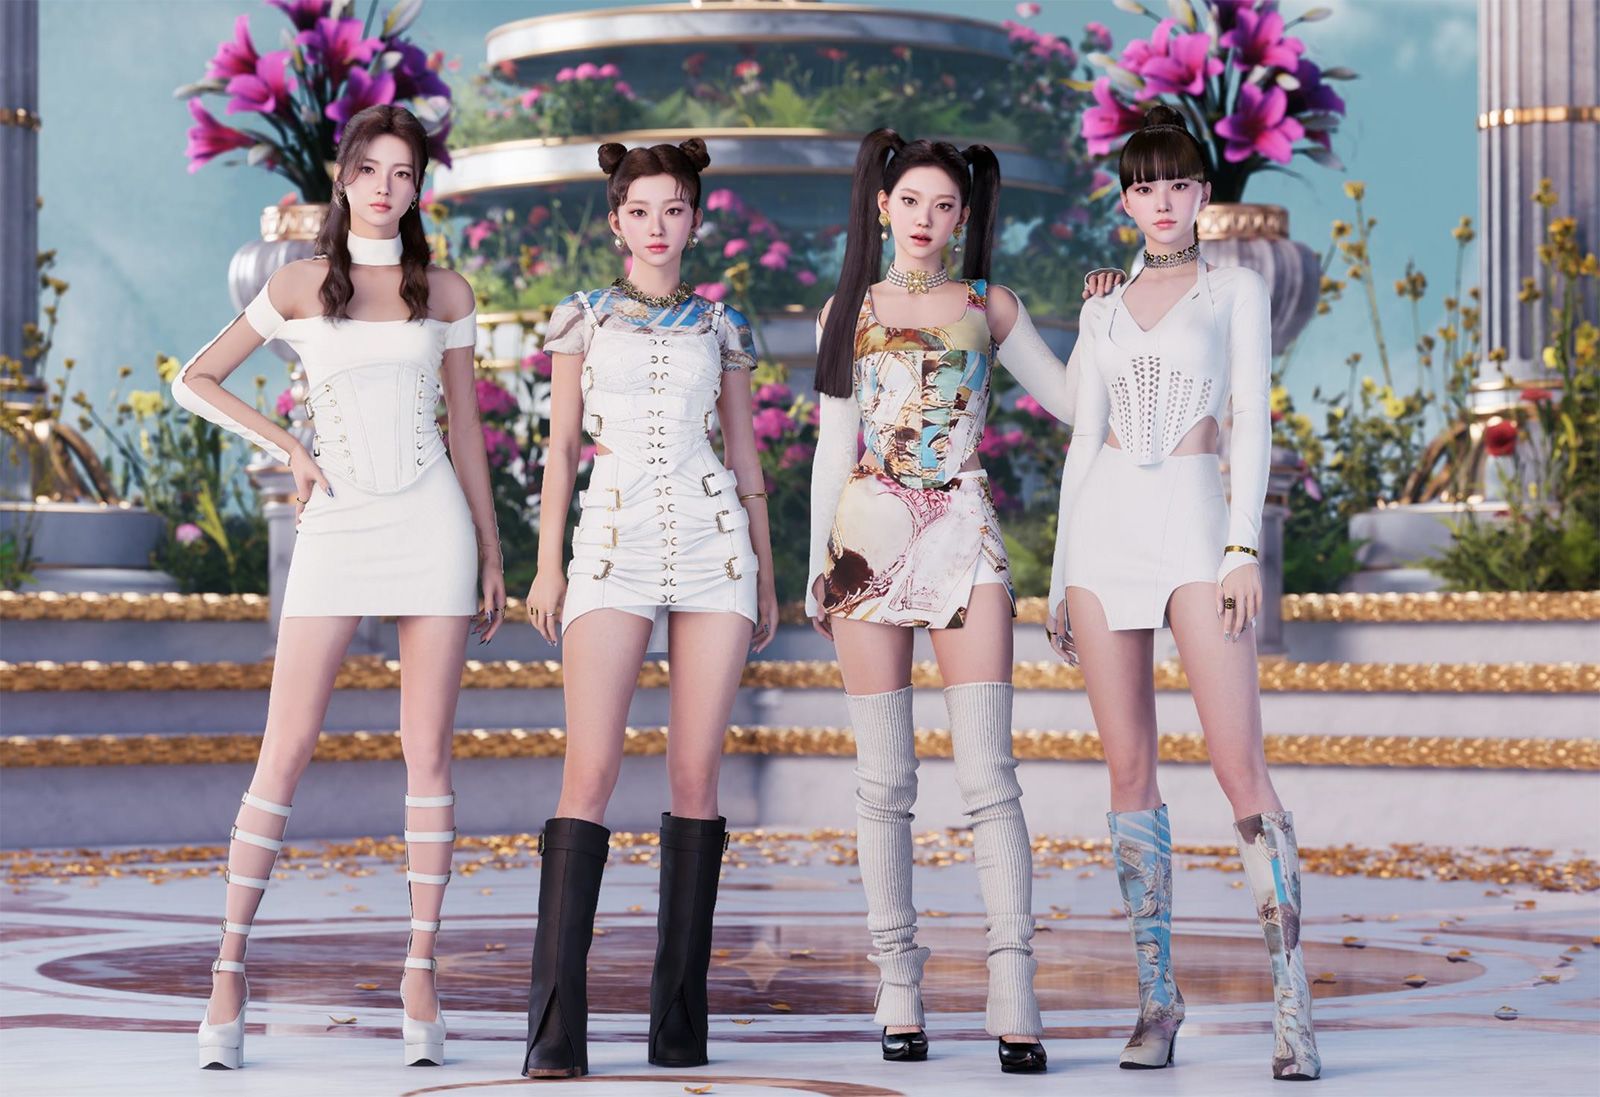 This is MAVE: the K-pop avatar group with millions of views